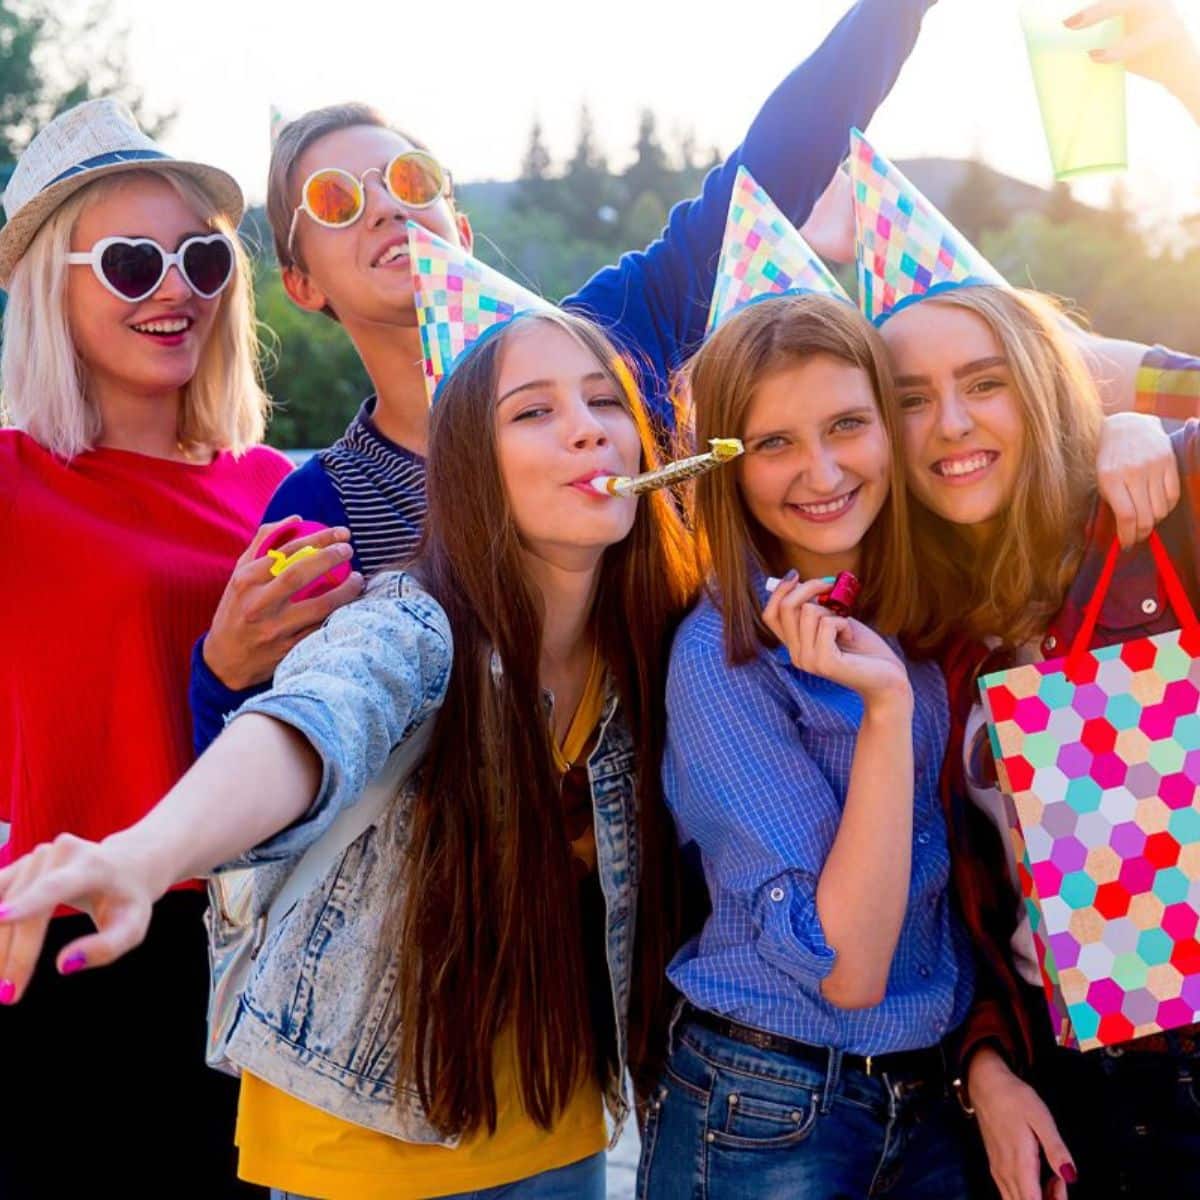 A group of friends having a birthday party with fun party theme ideas for teens.